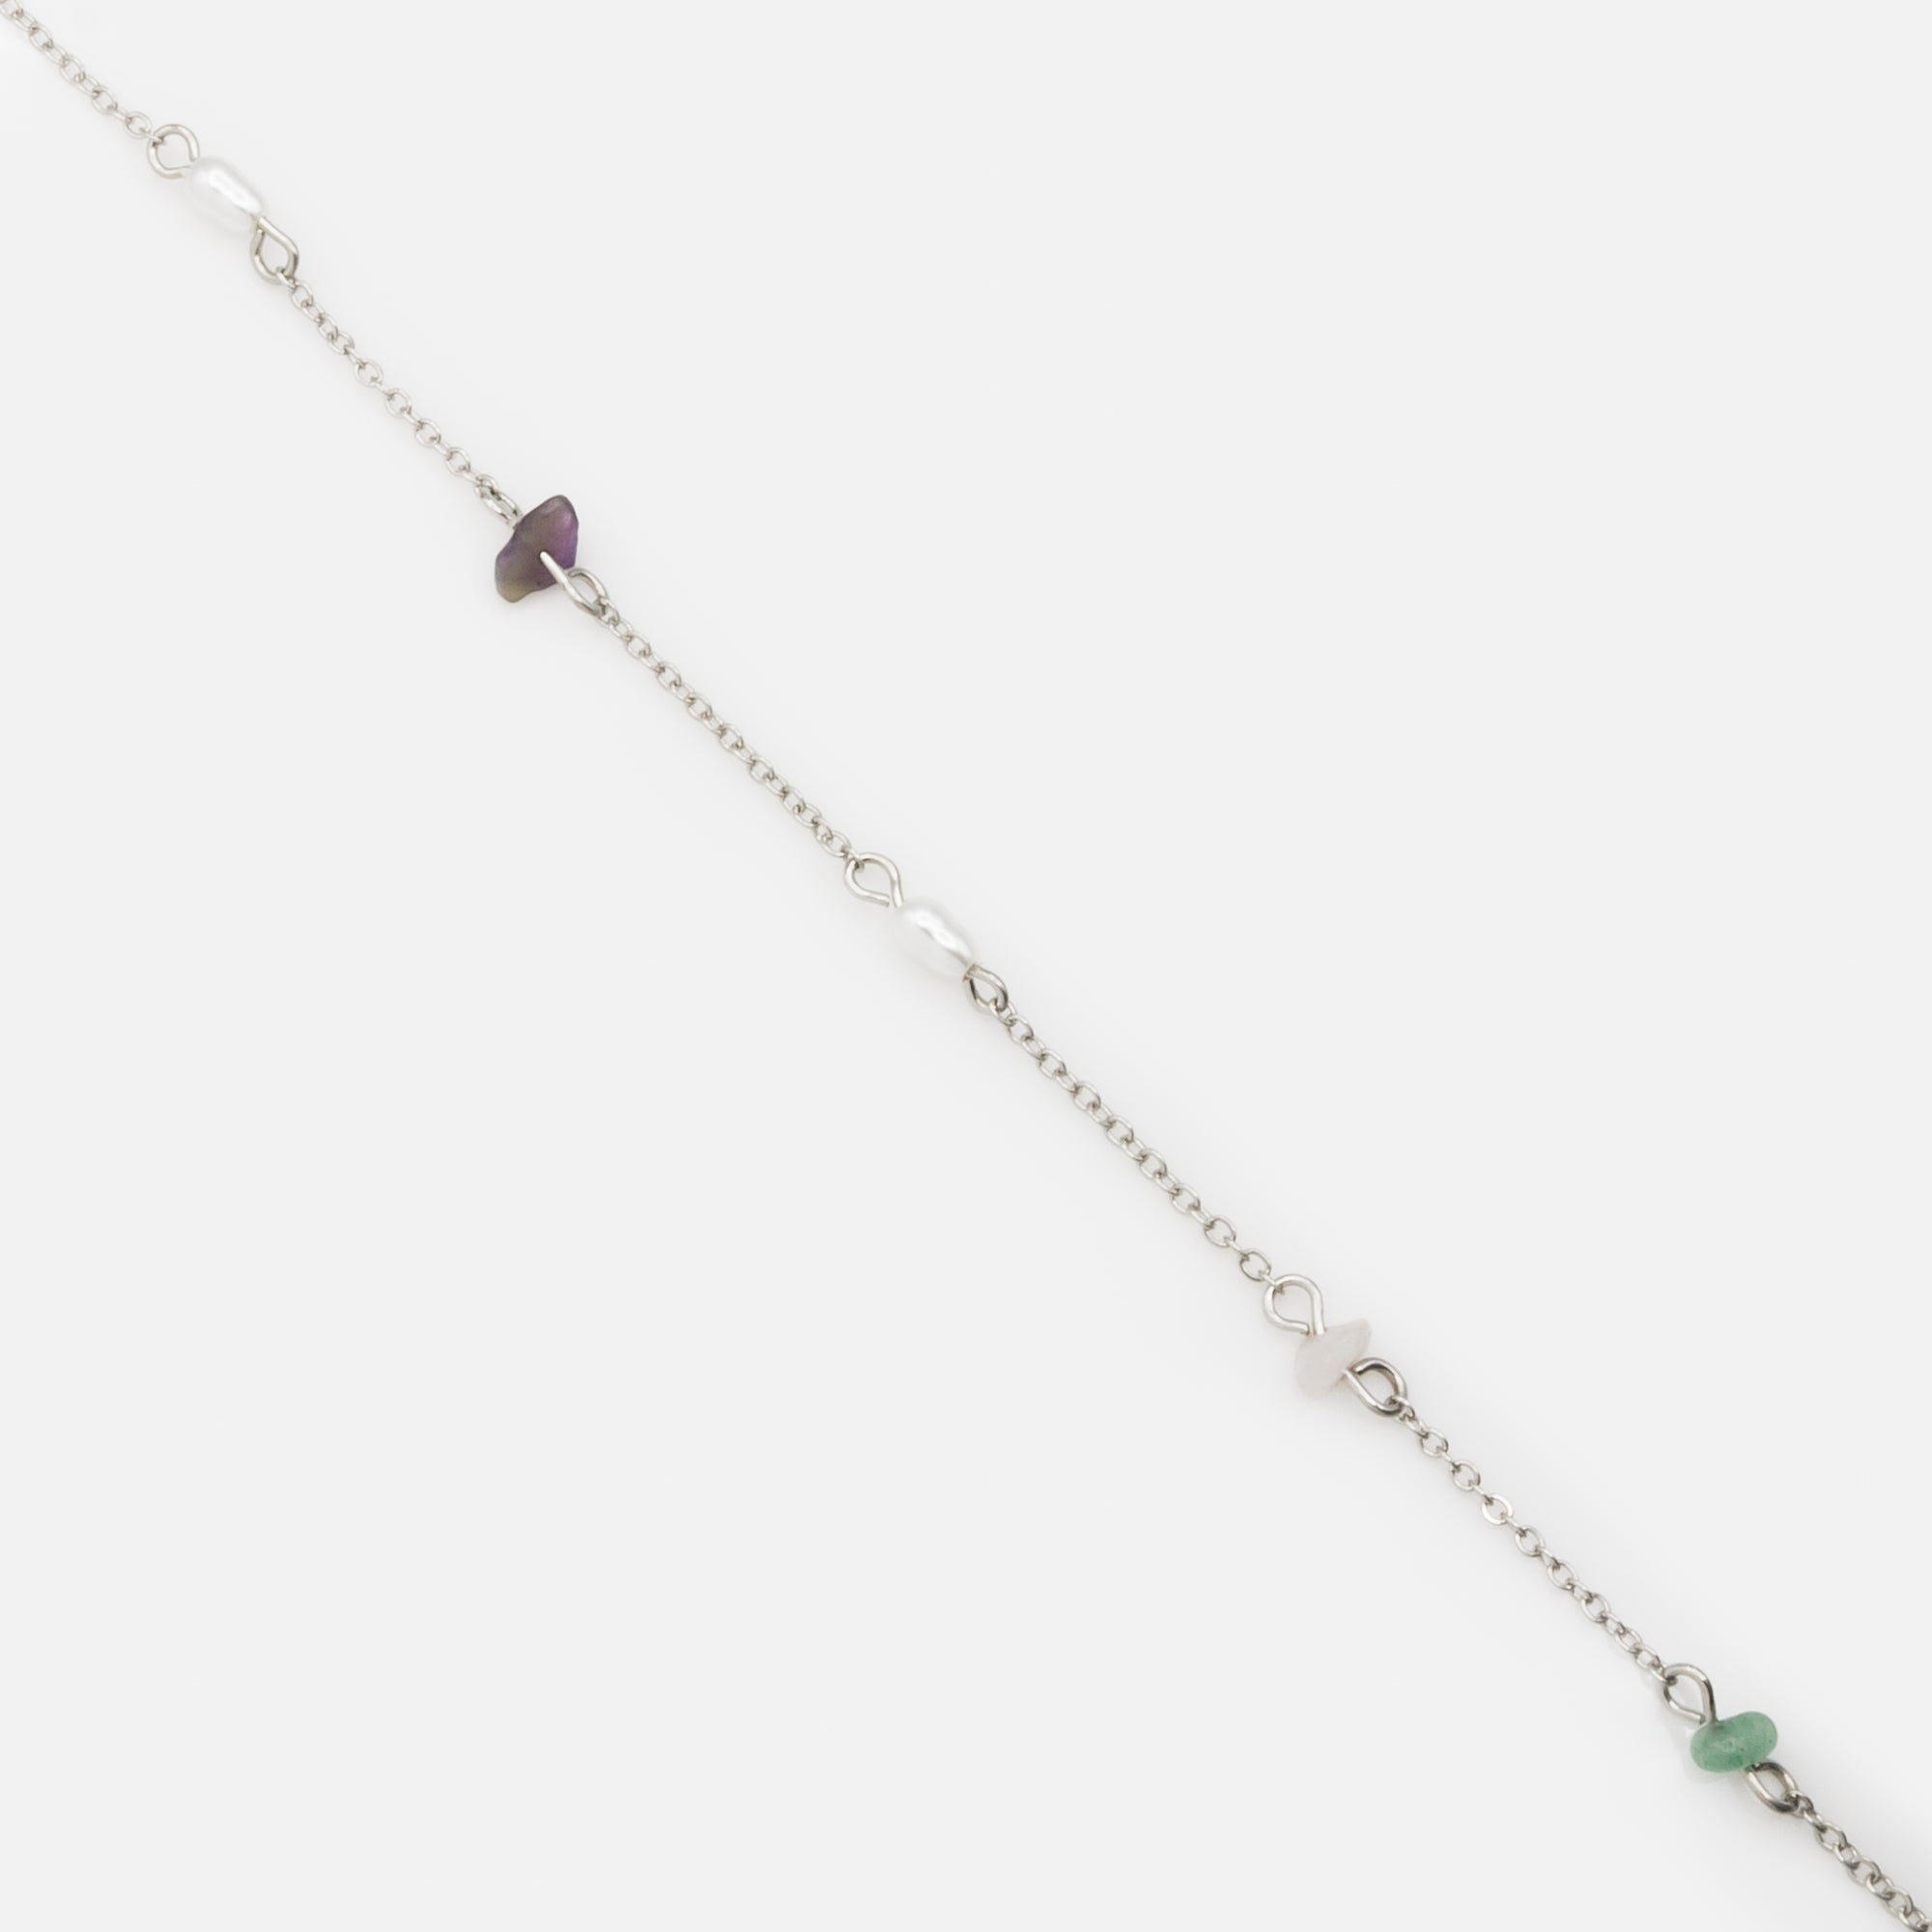 Silver anklet with pearls and colored stones